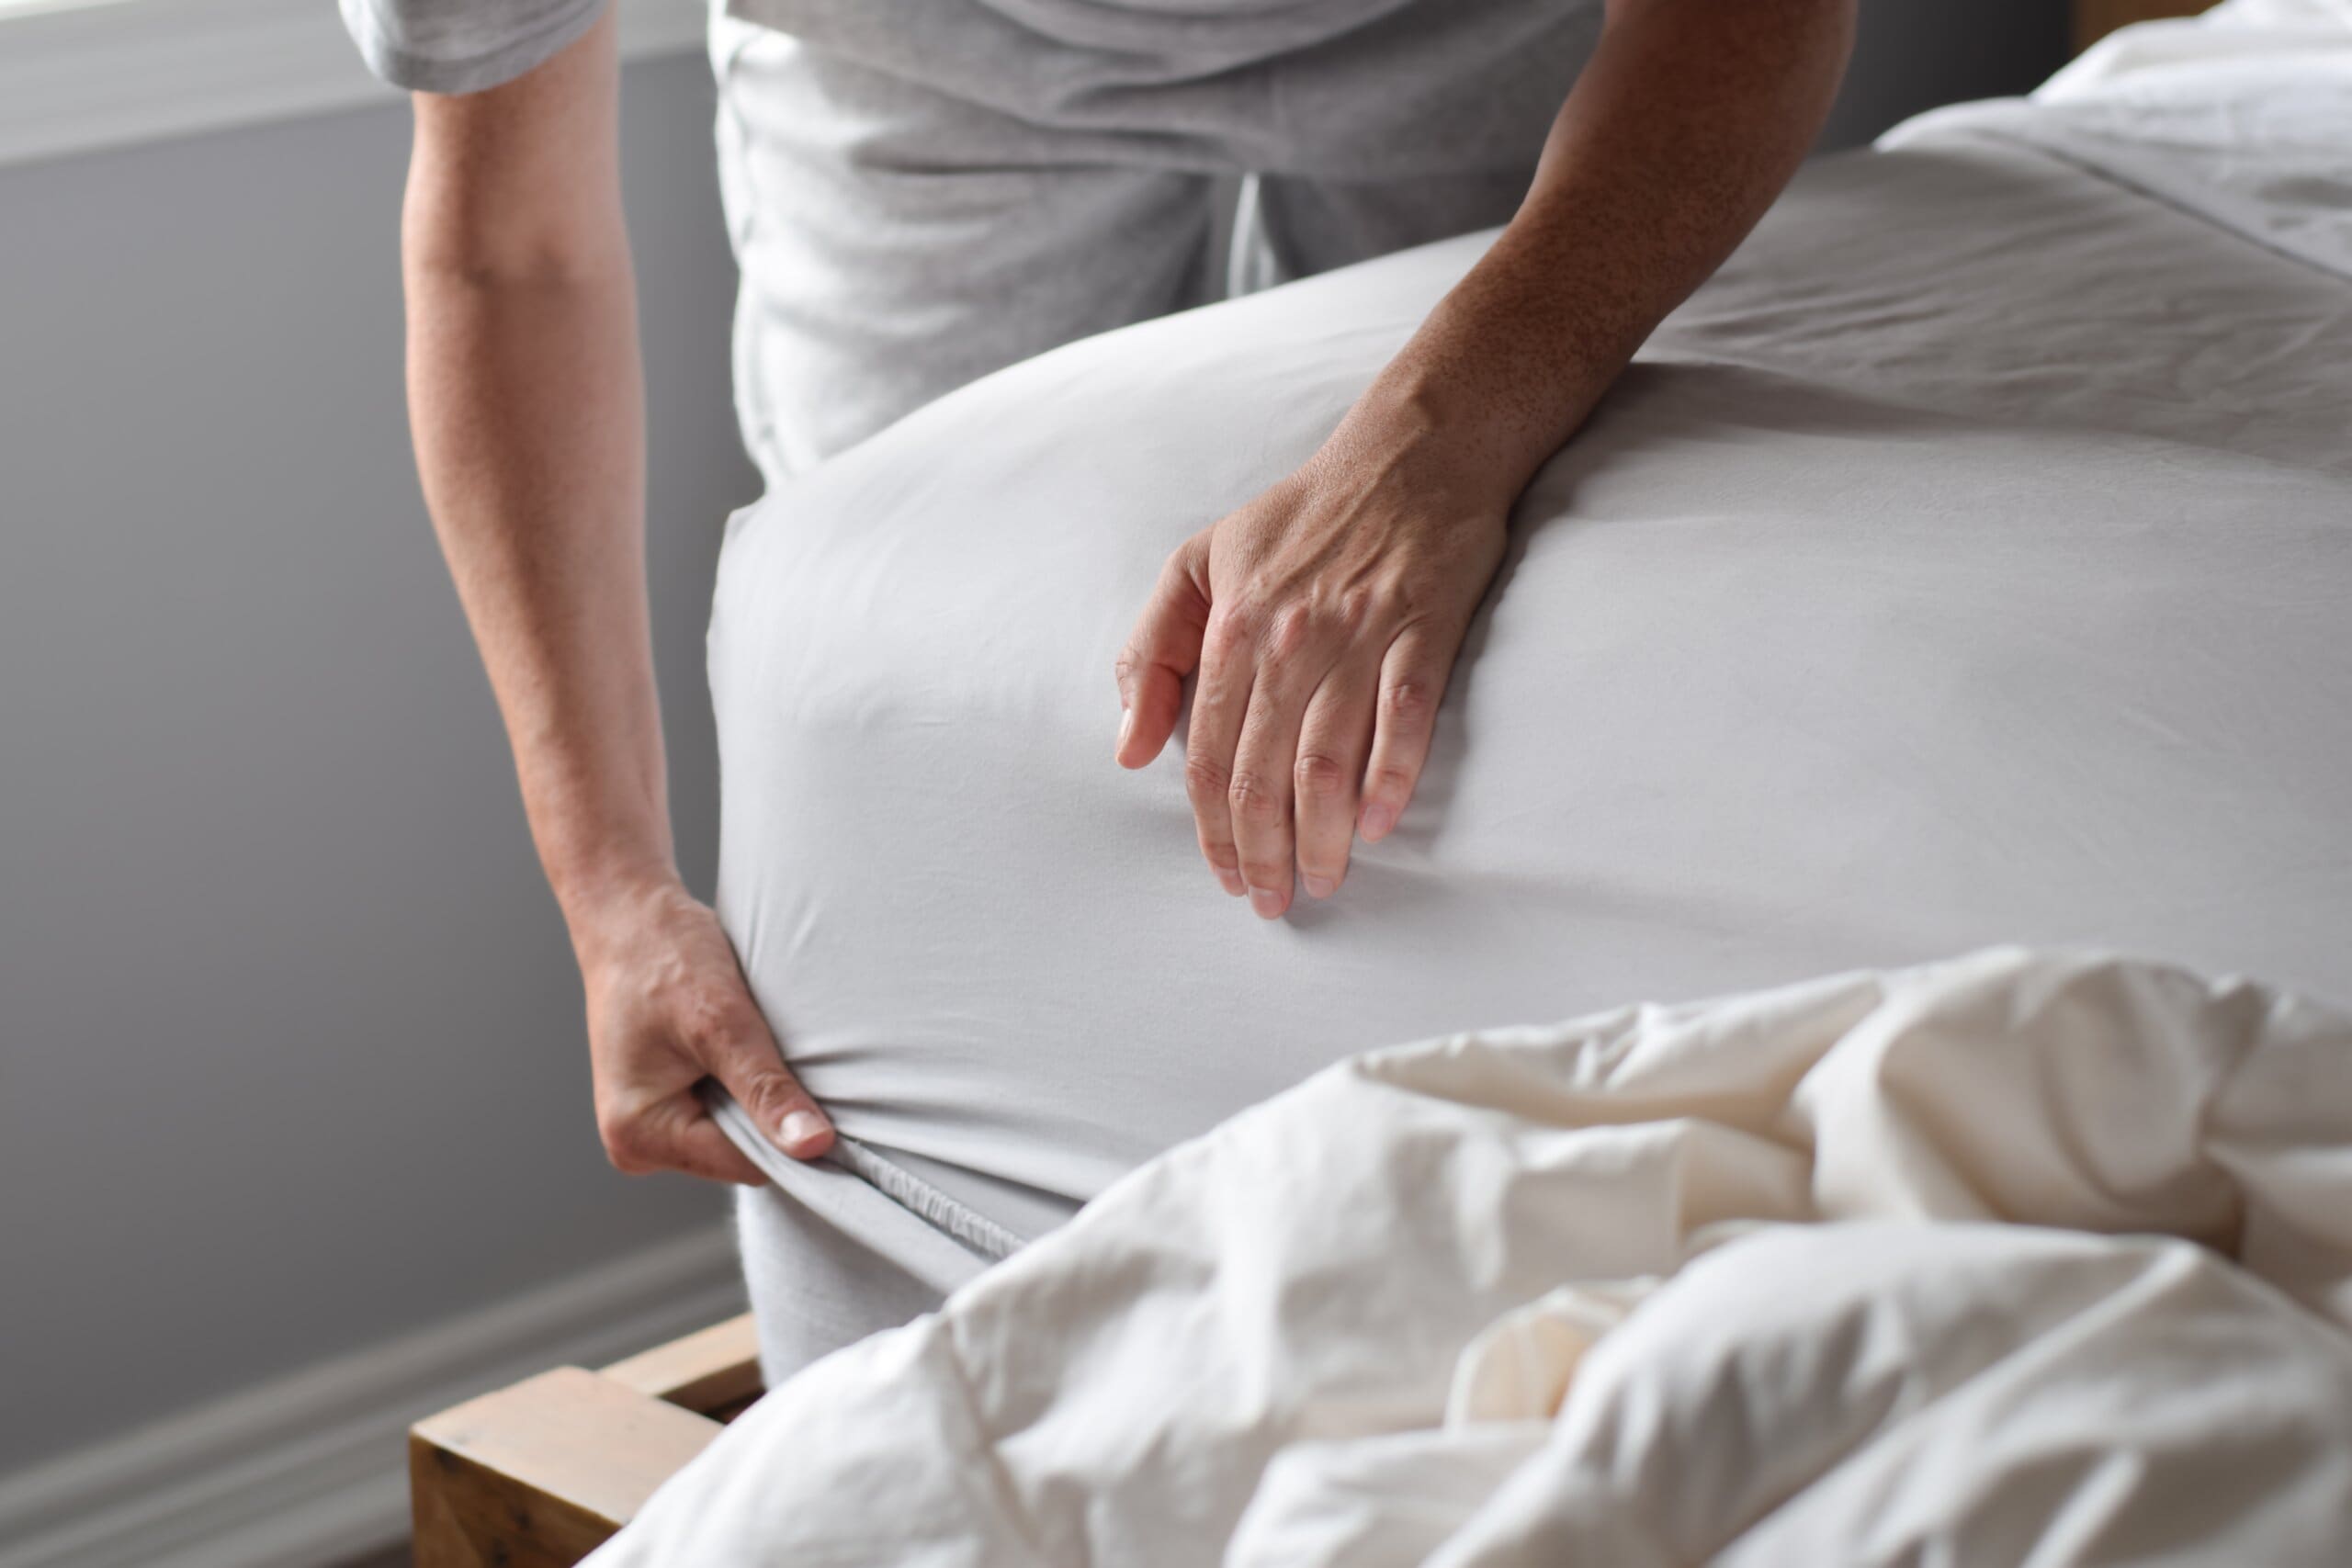 Cropped image of someone putting a deep fitted sheet on a thick mattress.